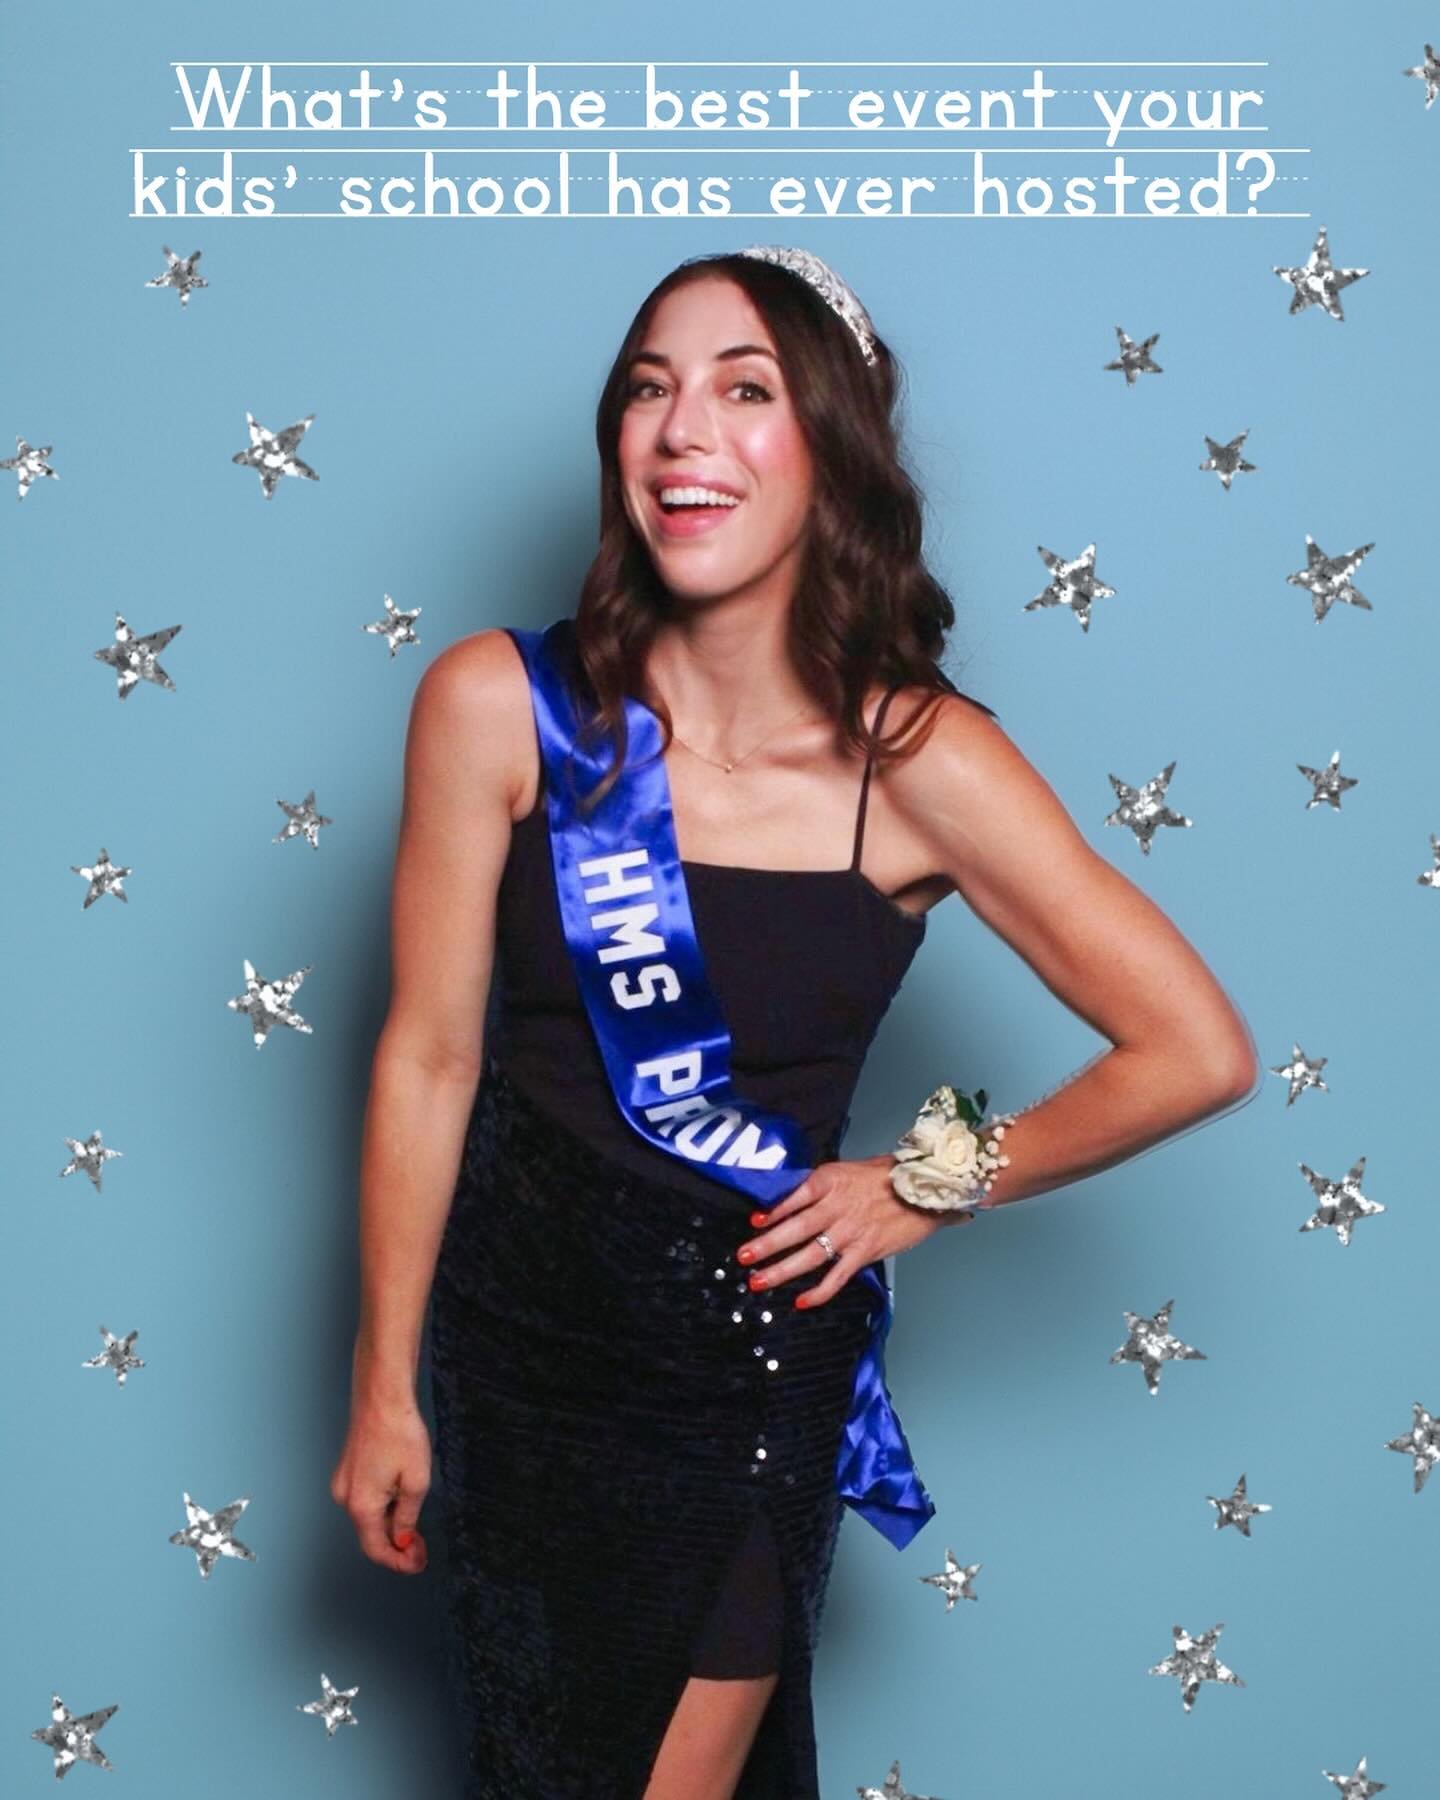 Prom night, family-carnival street fair&hellip;we&rsquo;ve had a lot of school spirit over here recently! Happy to relax but also really excited to scroll through the memories from these events 🥰 What&rsquo;s the best fundraiser or celebration your 